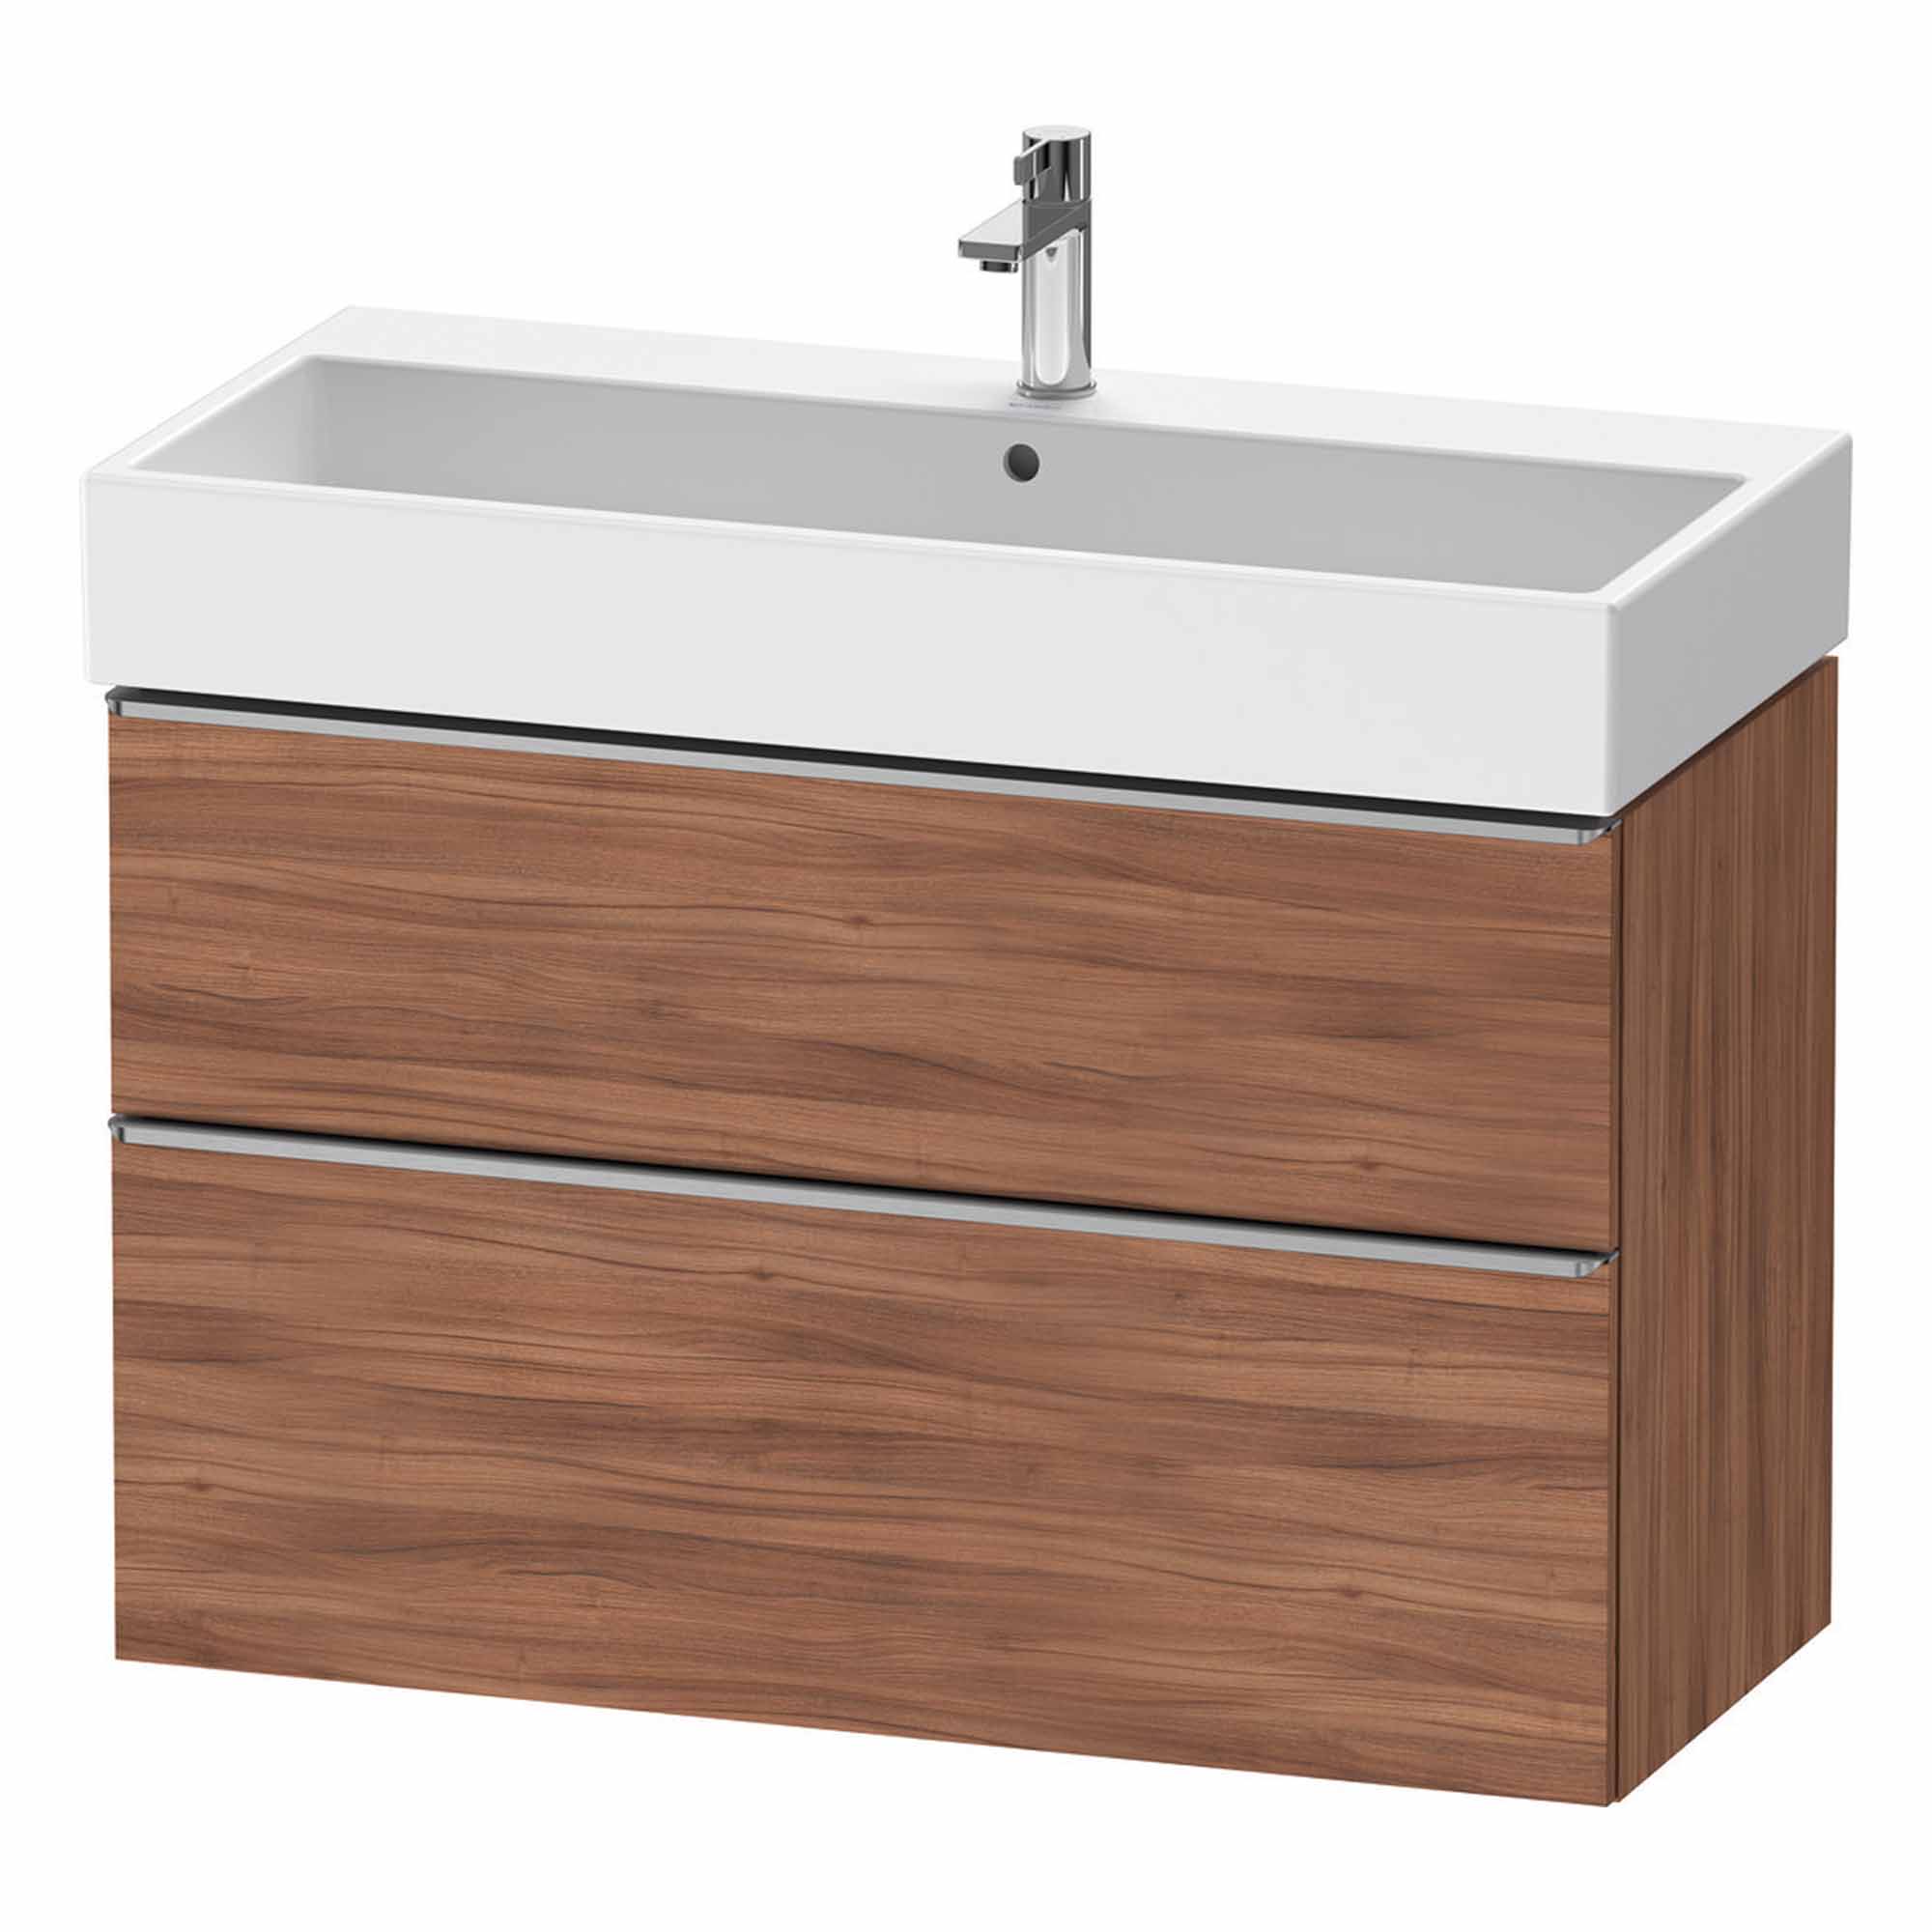 duravit d-neo 1000 wall mounted vanity unit with vero basin walnut stainless steel handles